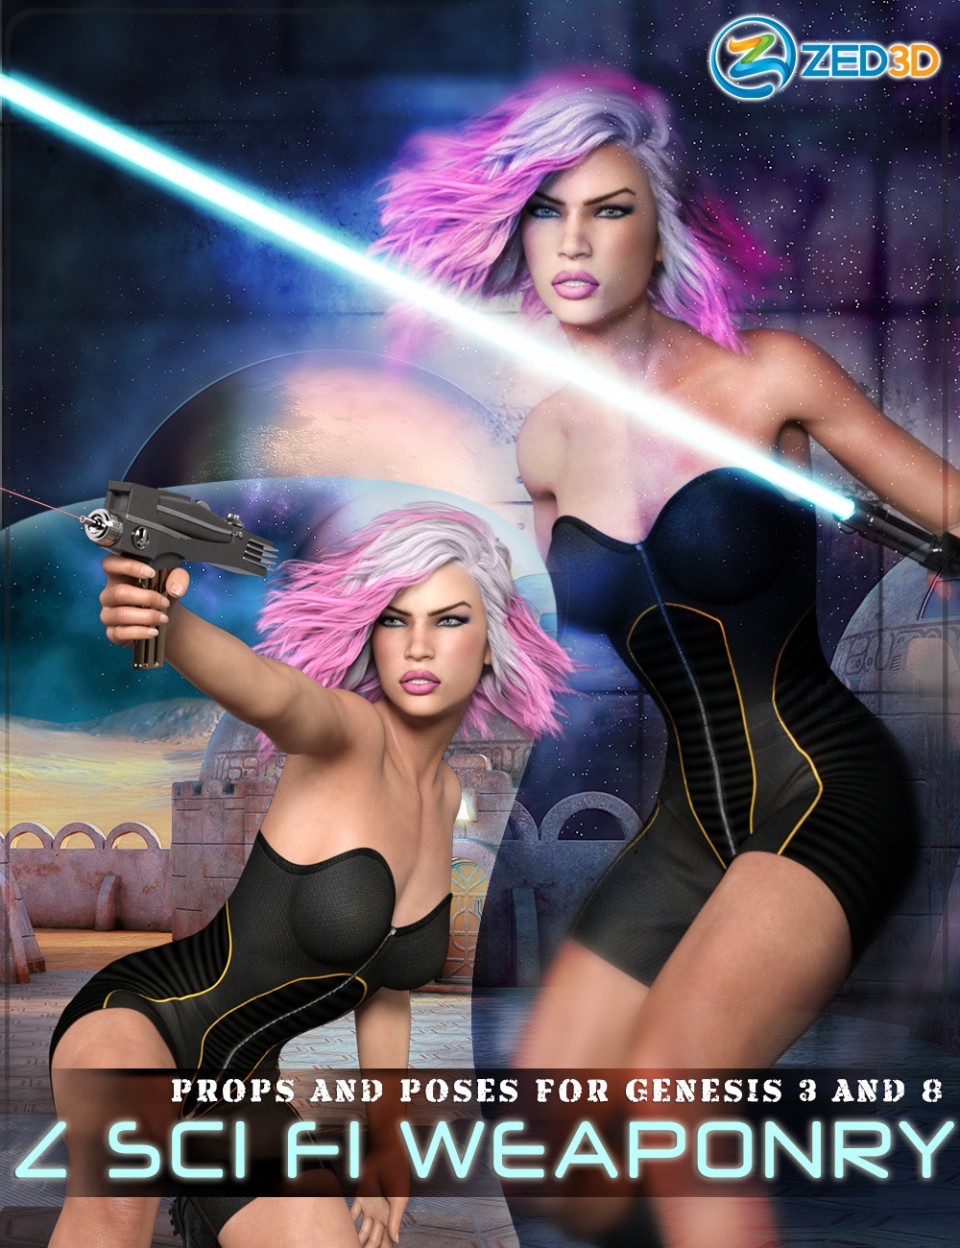 Z Sci Fi Weaponry – Props and Poses for Genesis 3 and 8_DAZ3D下载站